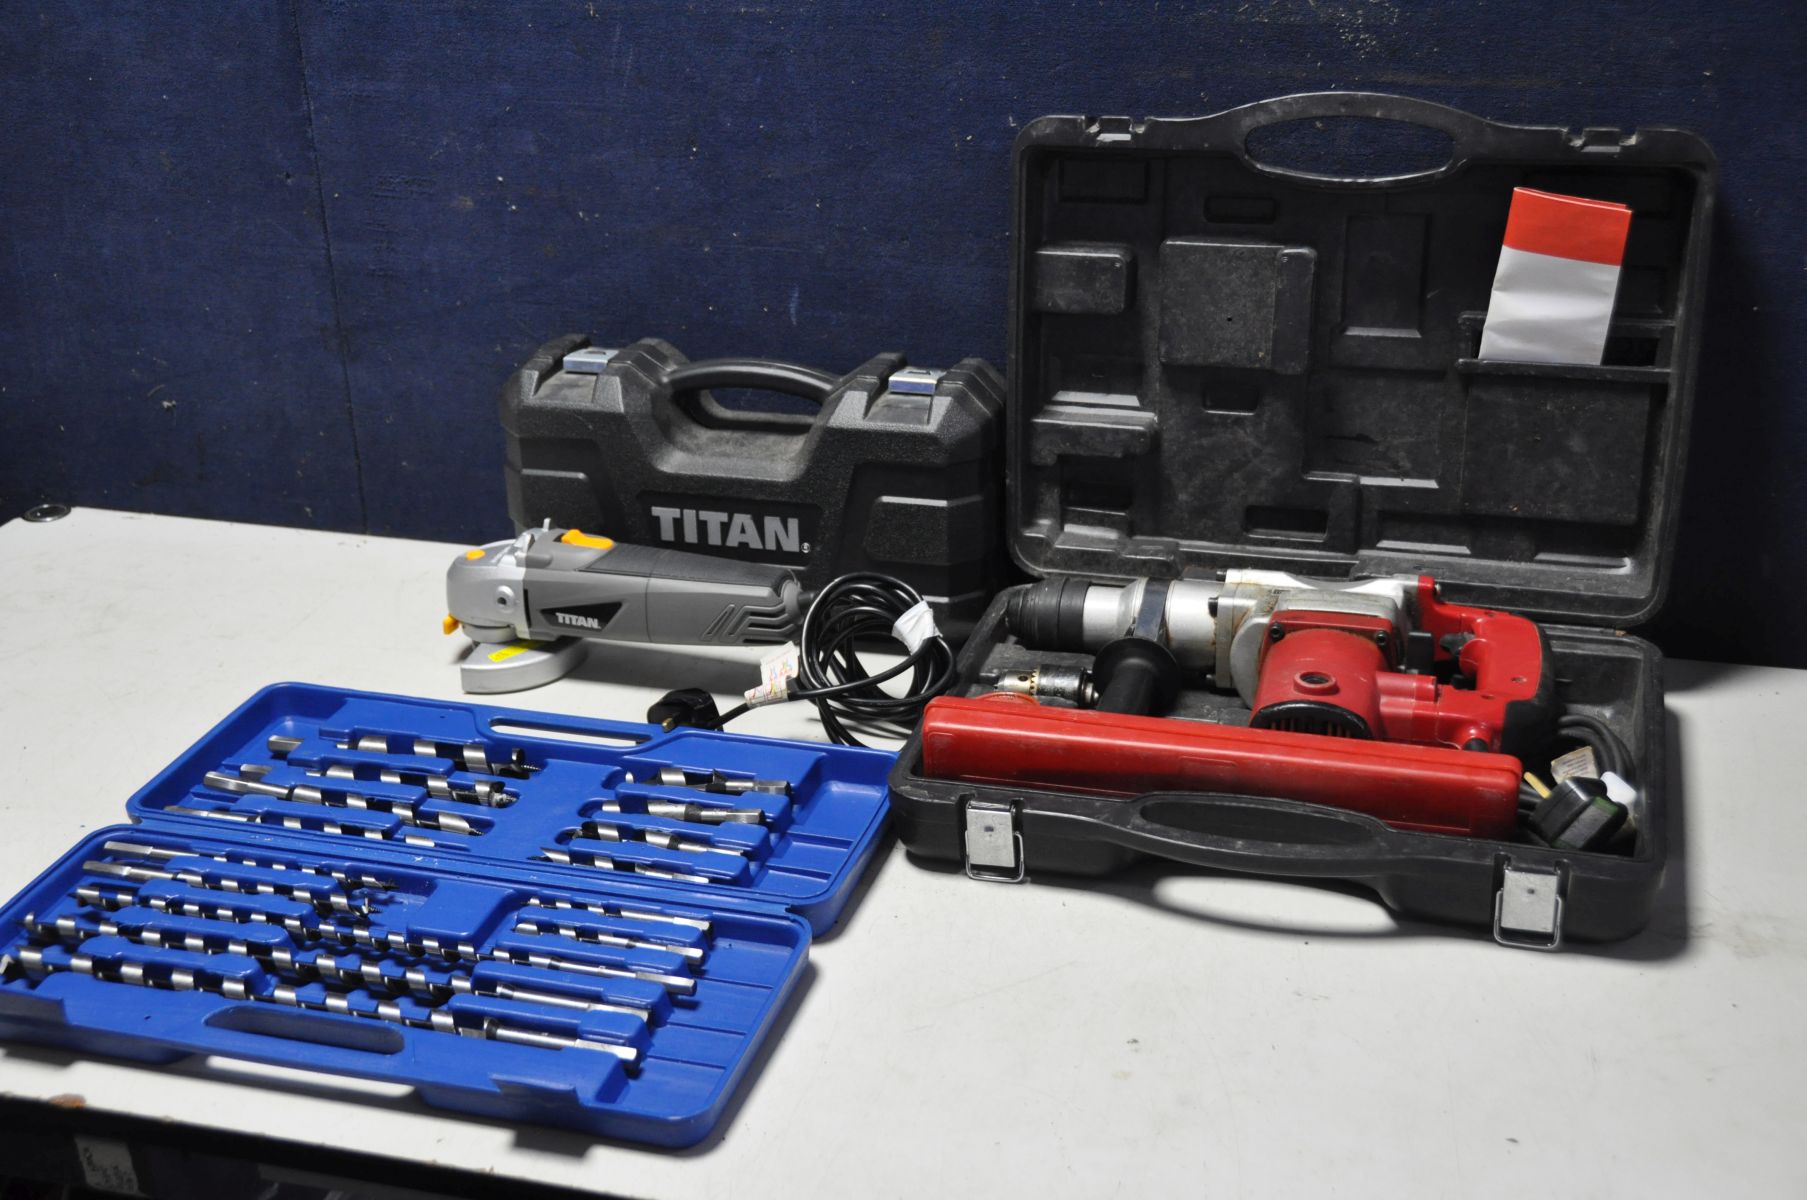 A CHAMPION CRHD850 850w rotary hammer drill in case with drill bits, a Titan TTB281GRD angle grinder